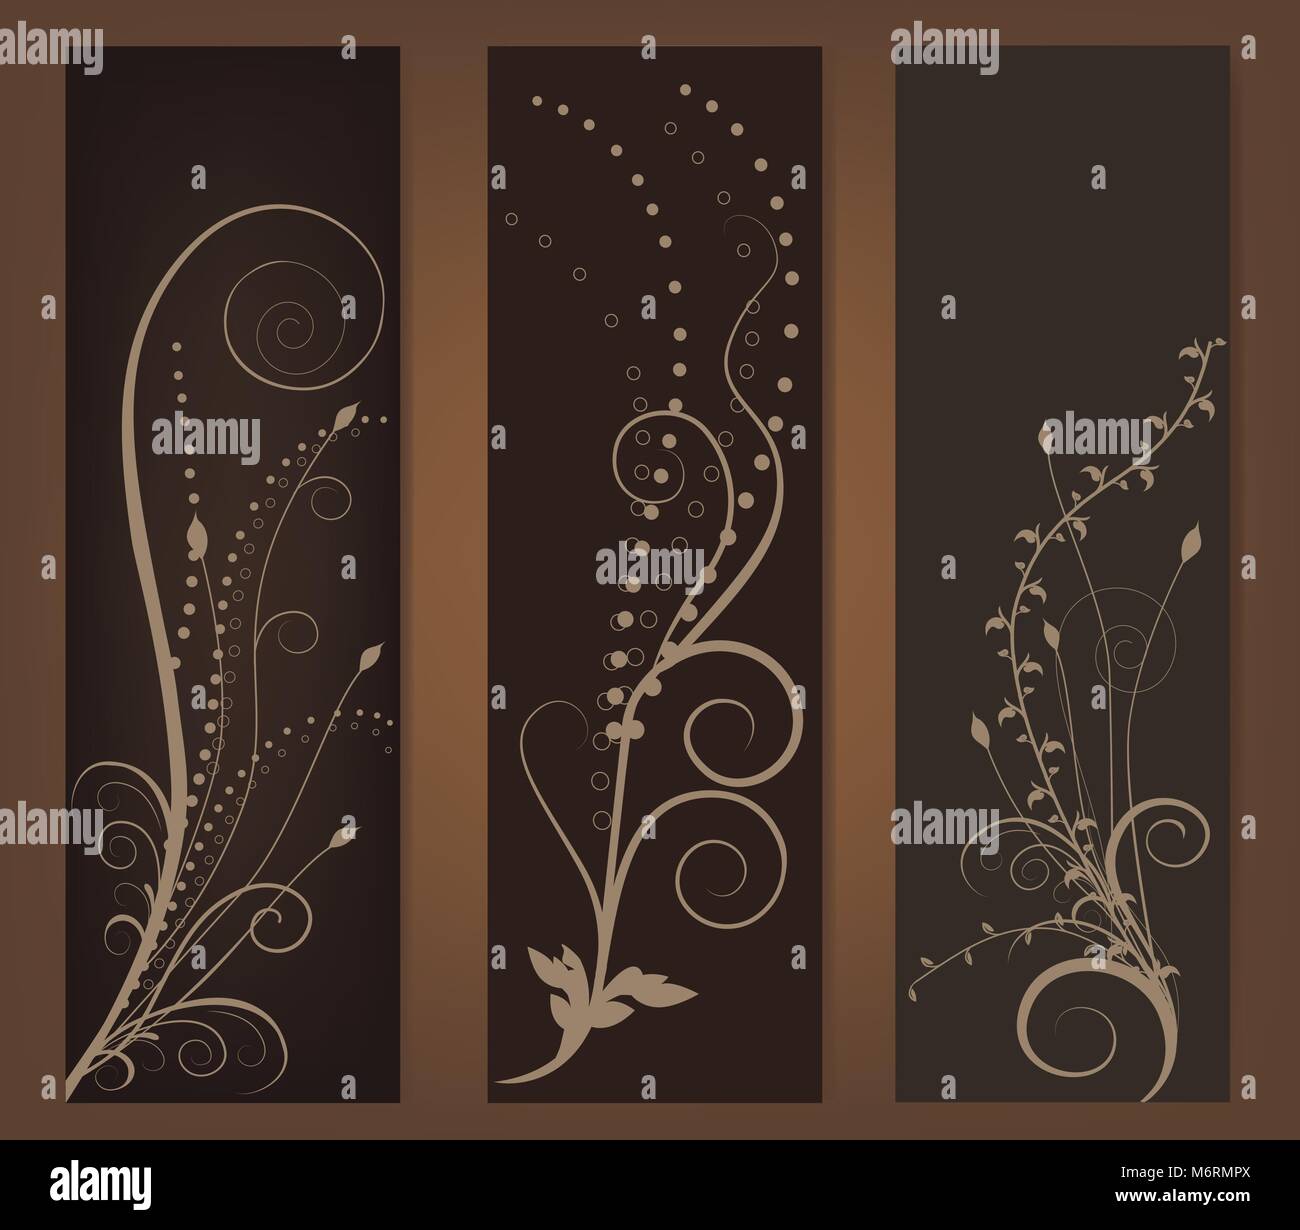 Collection of abstract floral banner Stock Vector